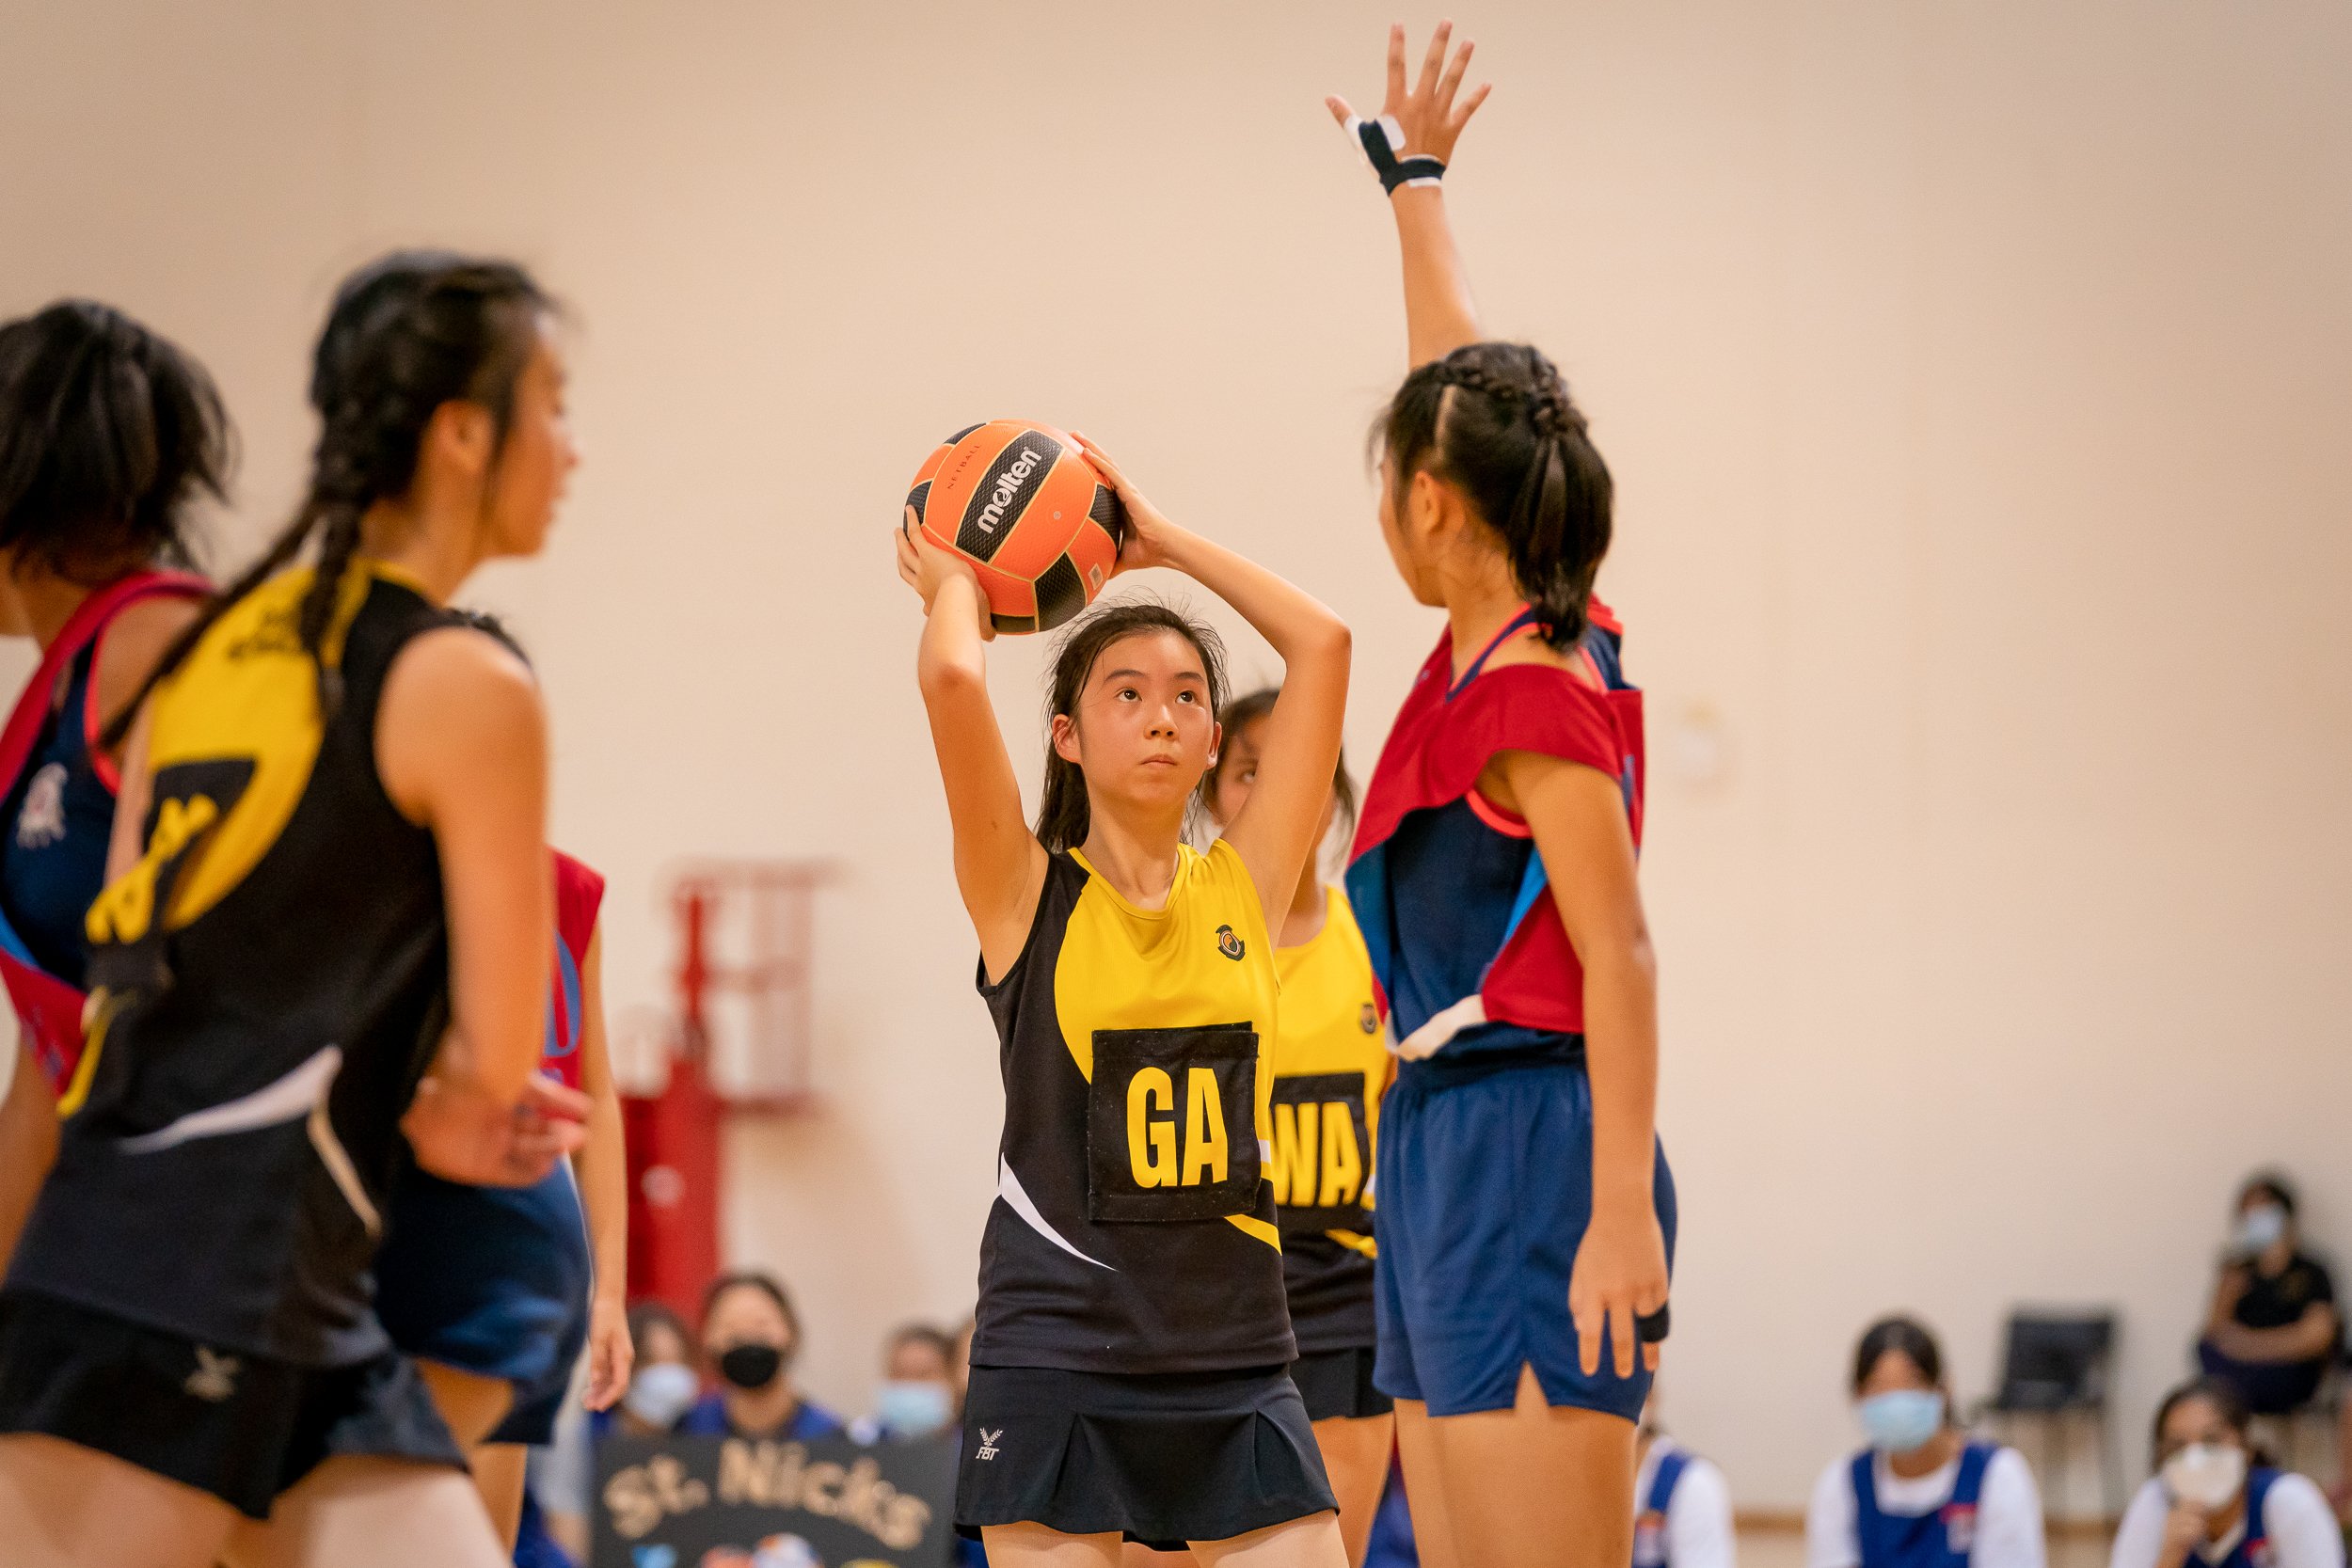 2022-04-29_NSG Netball_Photo By Ron Low_94